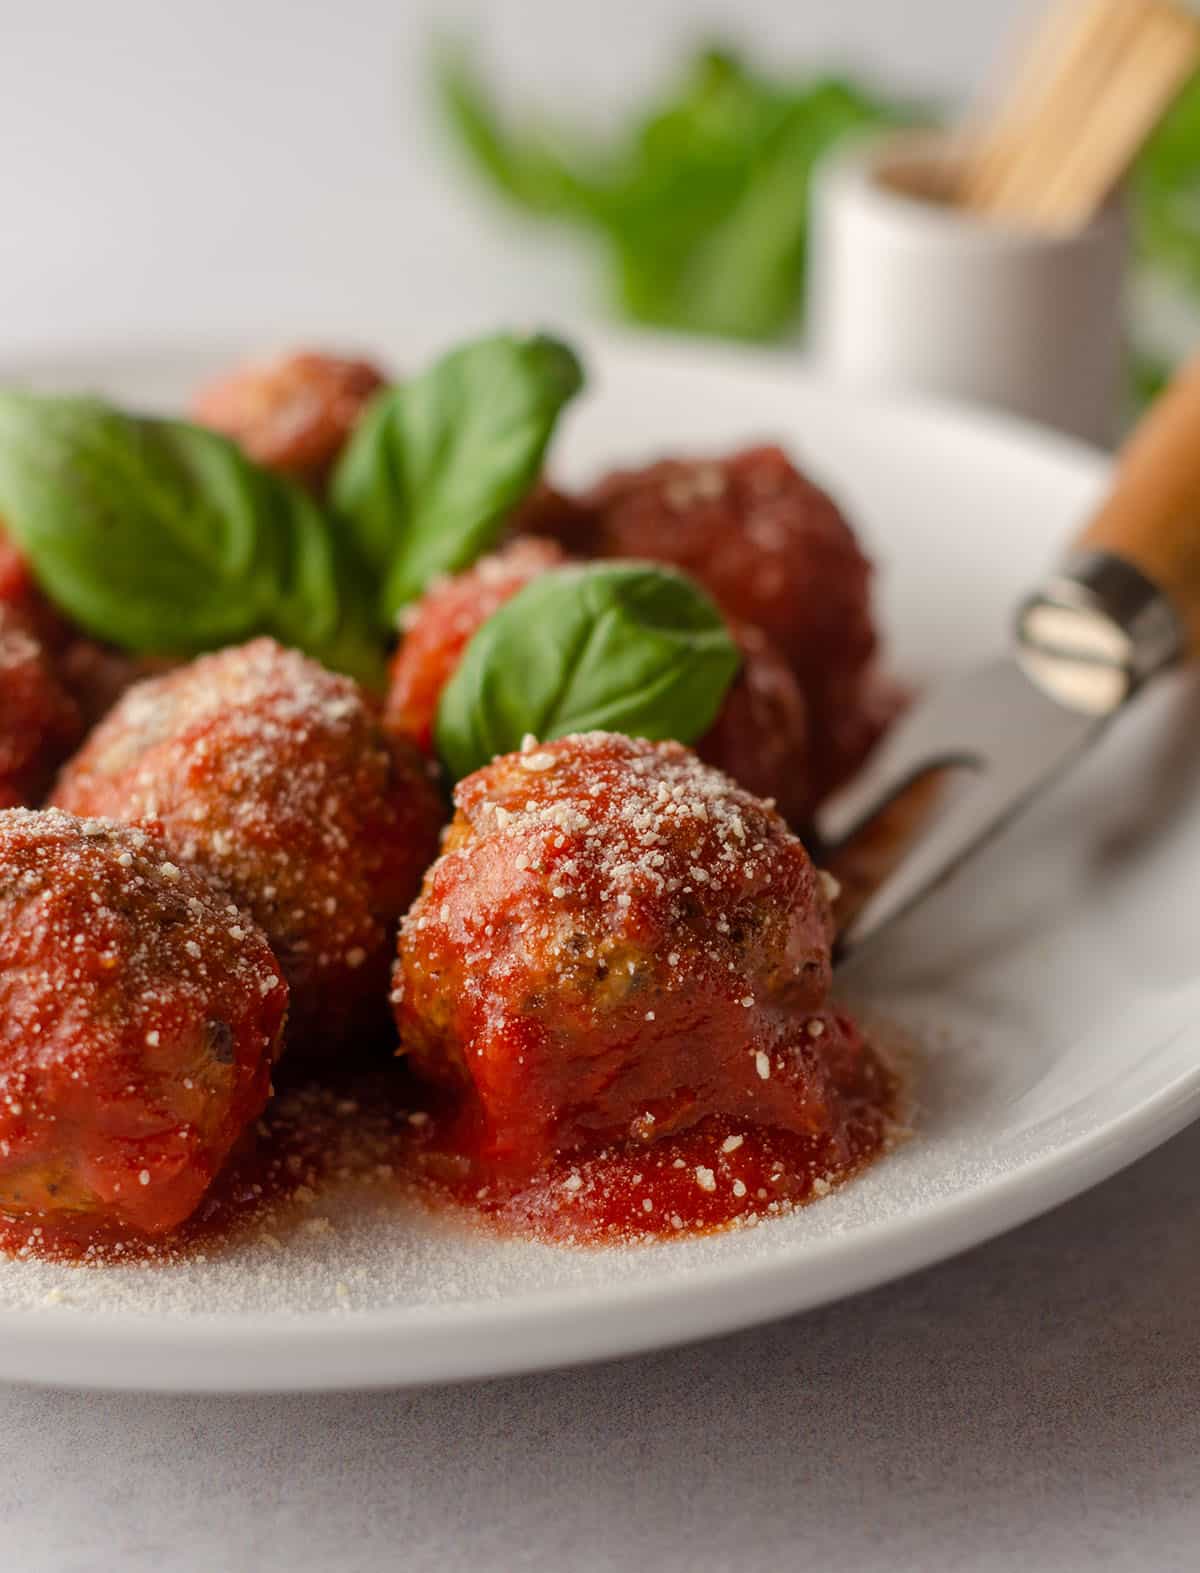 gluten free meatballs on a plate with basil leaves and a serving fork